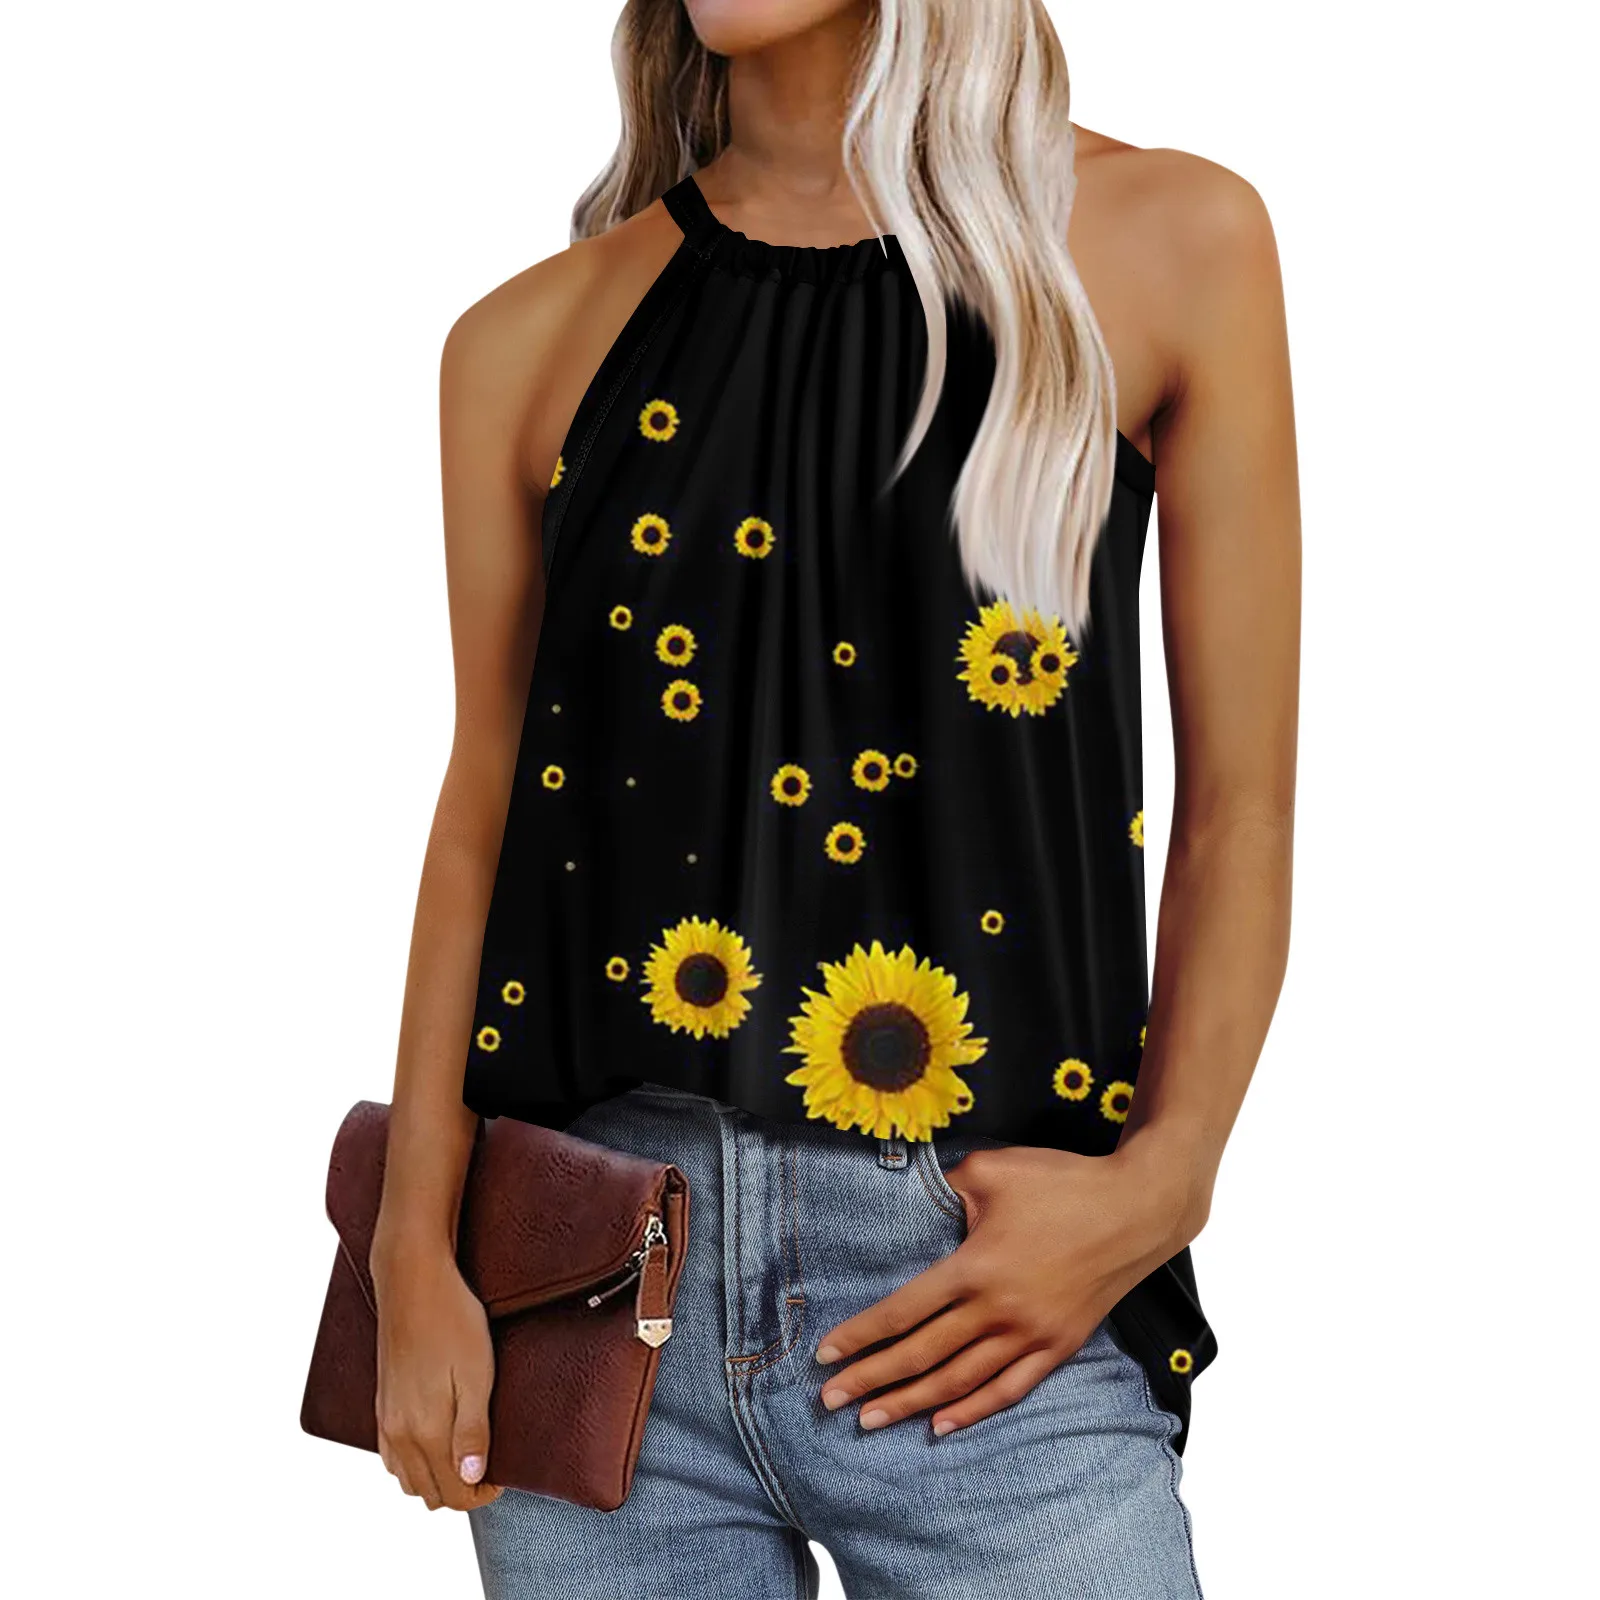 

Tops With Straps Daily Fashion Printed Women Vest Top Round Neck Summer Sleeveless Oversized T Shirts Women Одежда Женская